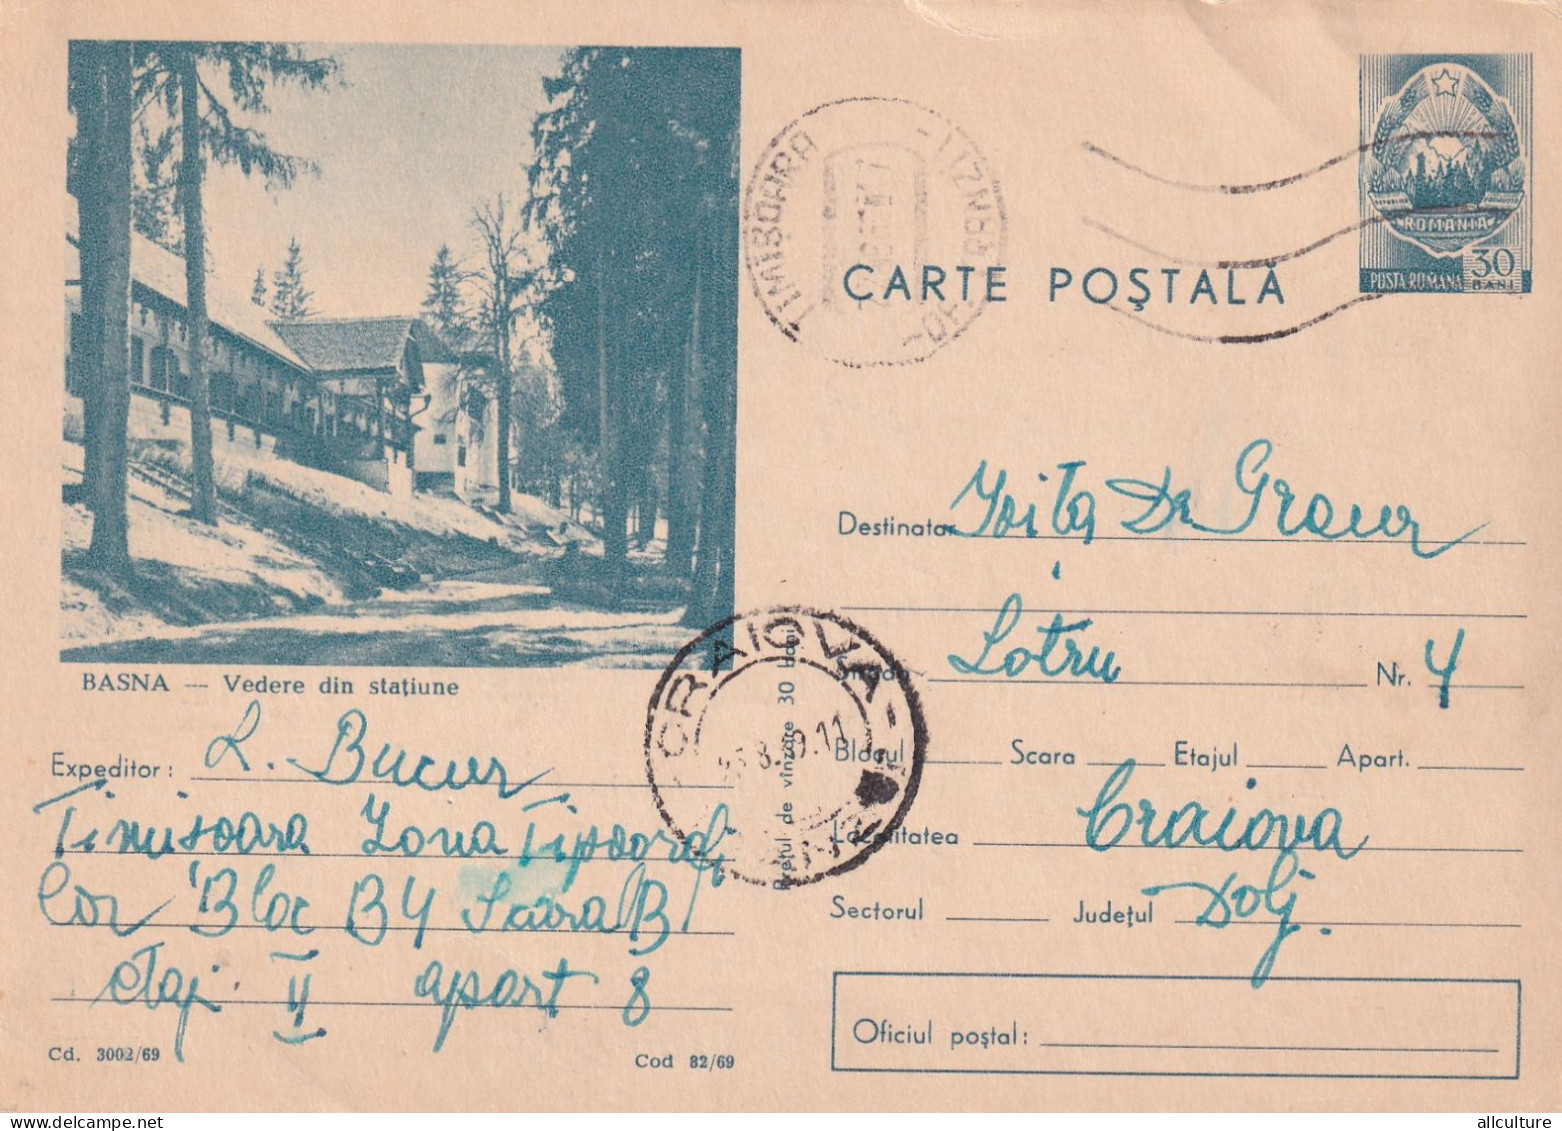 A24464 - BASNA View From The Resort Mountain  Postal Stationery  Romania 1969 - Enteros Postales